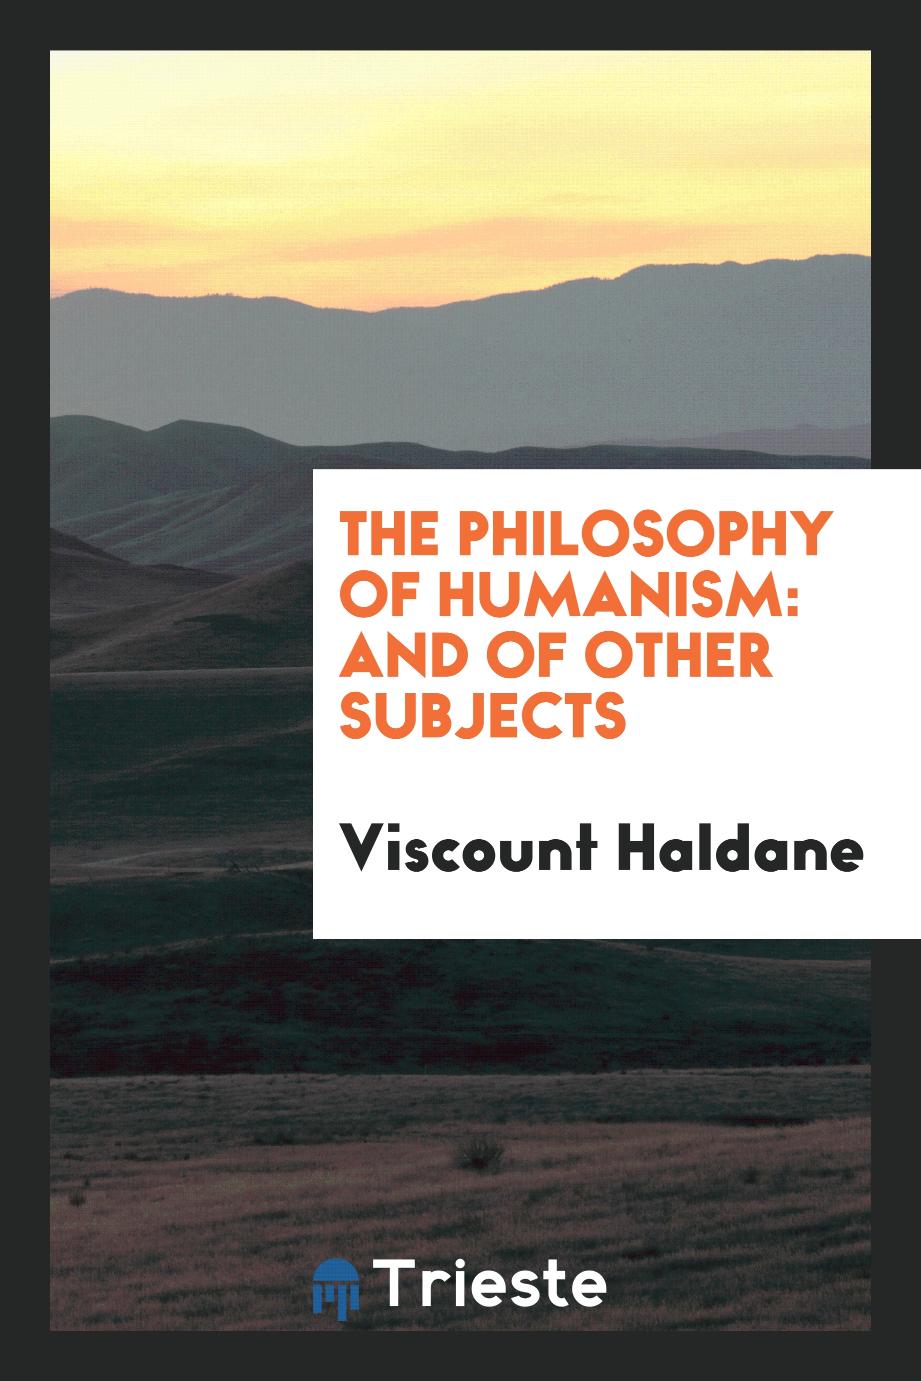 The Philosophy of Humanism: And of Other Subjects